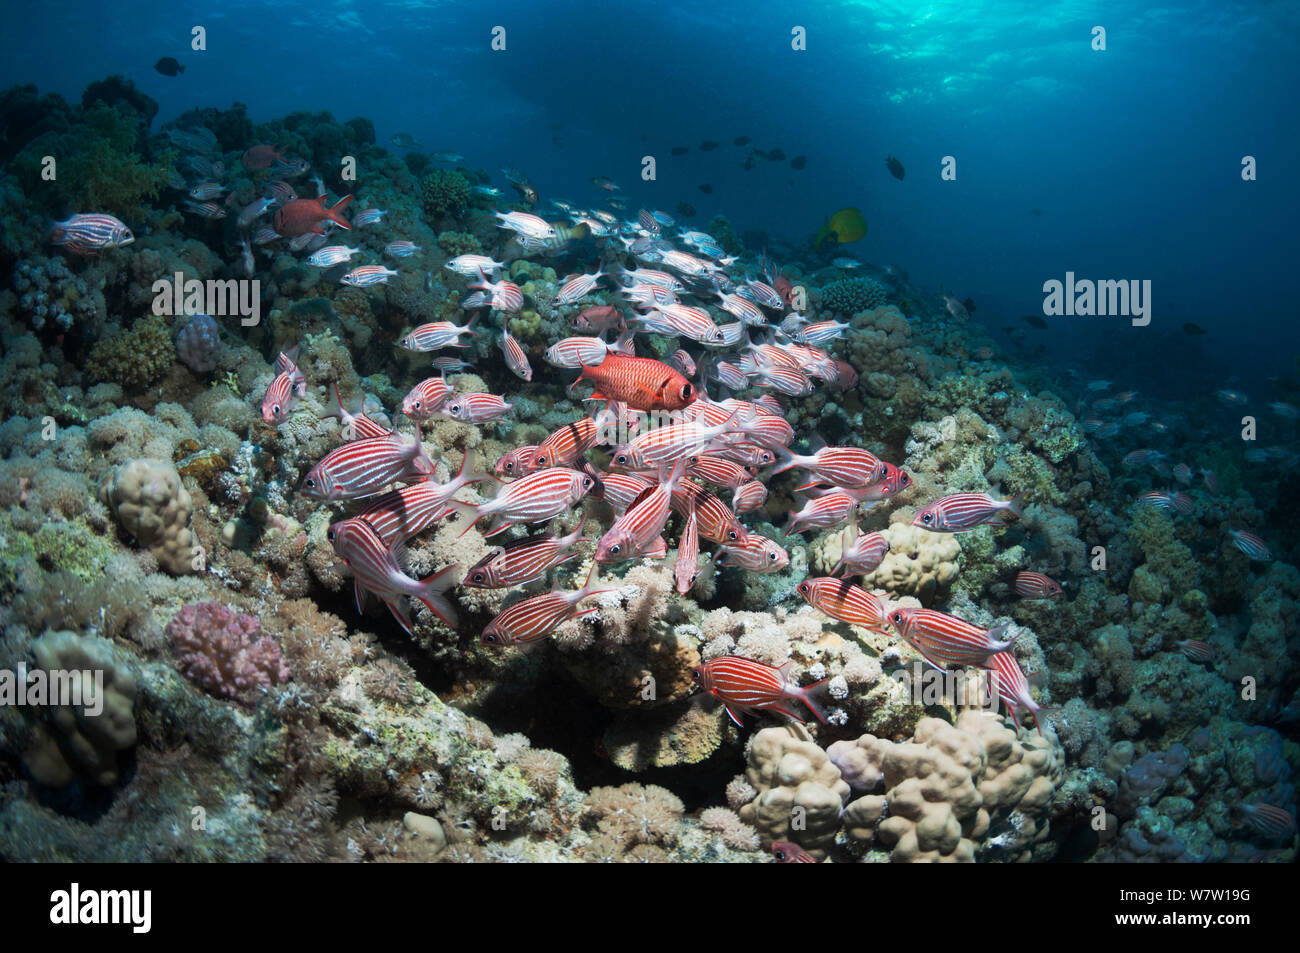 Coral reef with a school of Crown squirrelfish (Sargocentron diadema), a few White-edged-soldierfish (Myripristis murdjan) and a boat in background. Egypt, Red Sea. Stock Photo